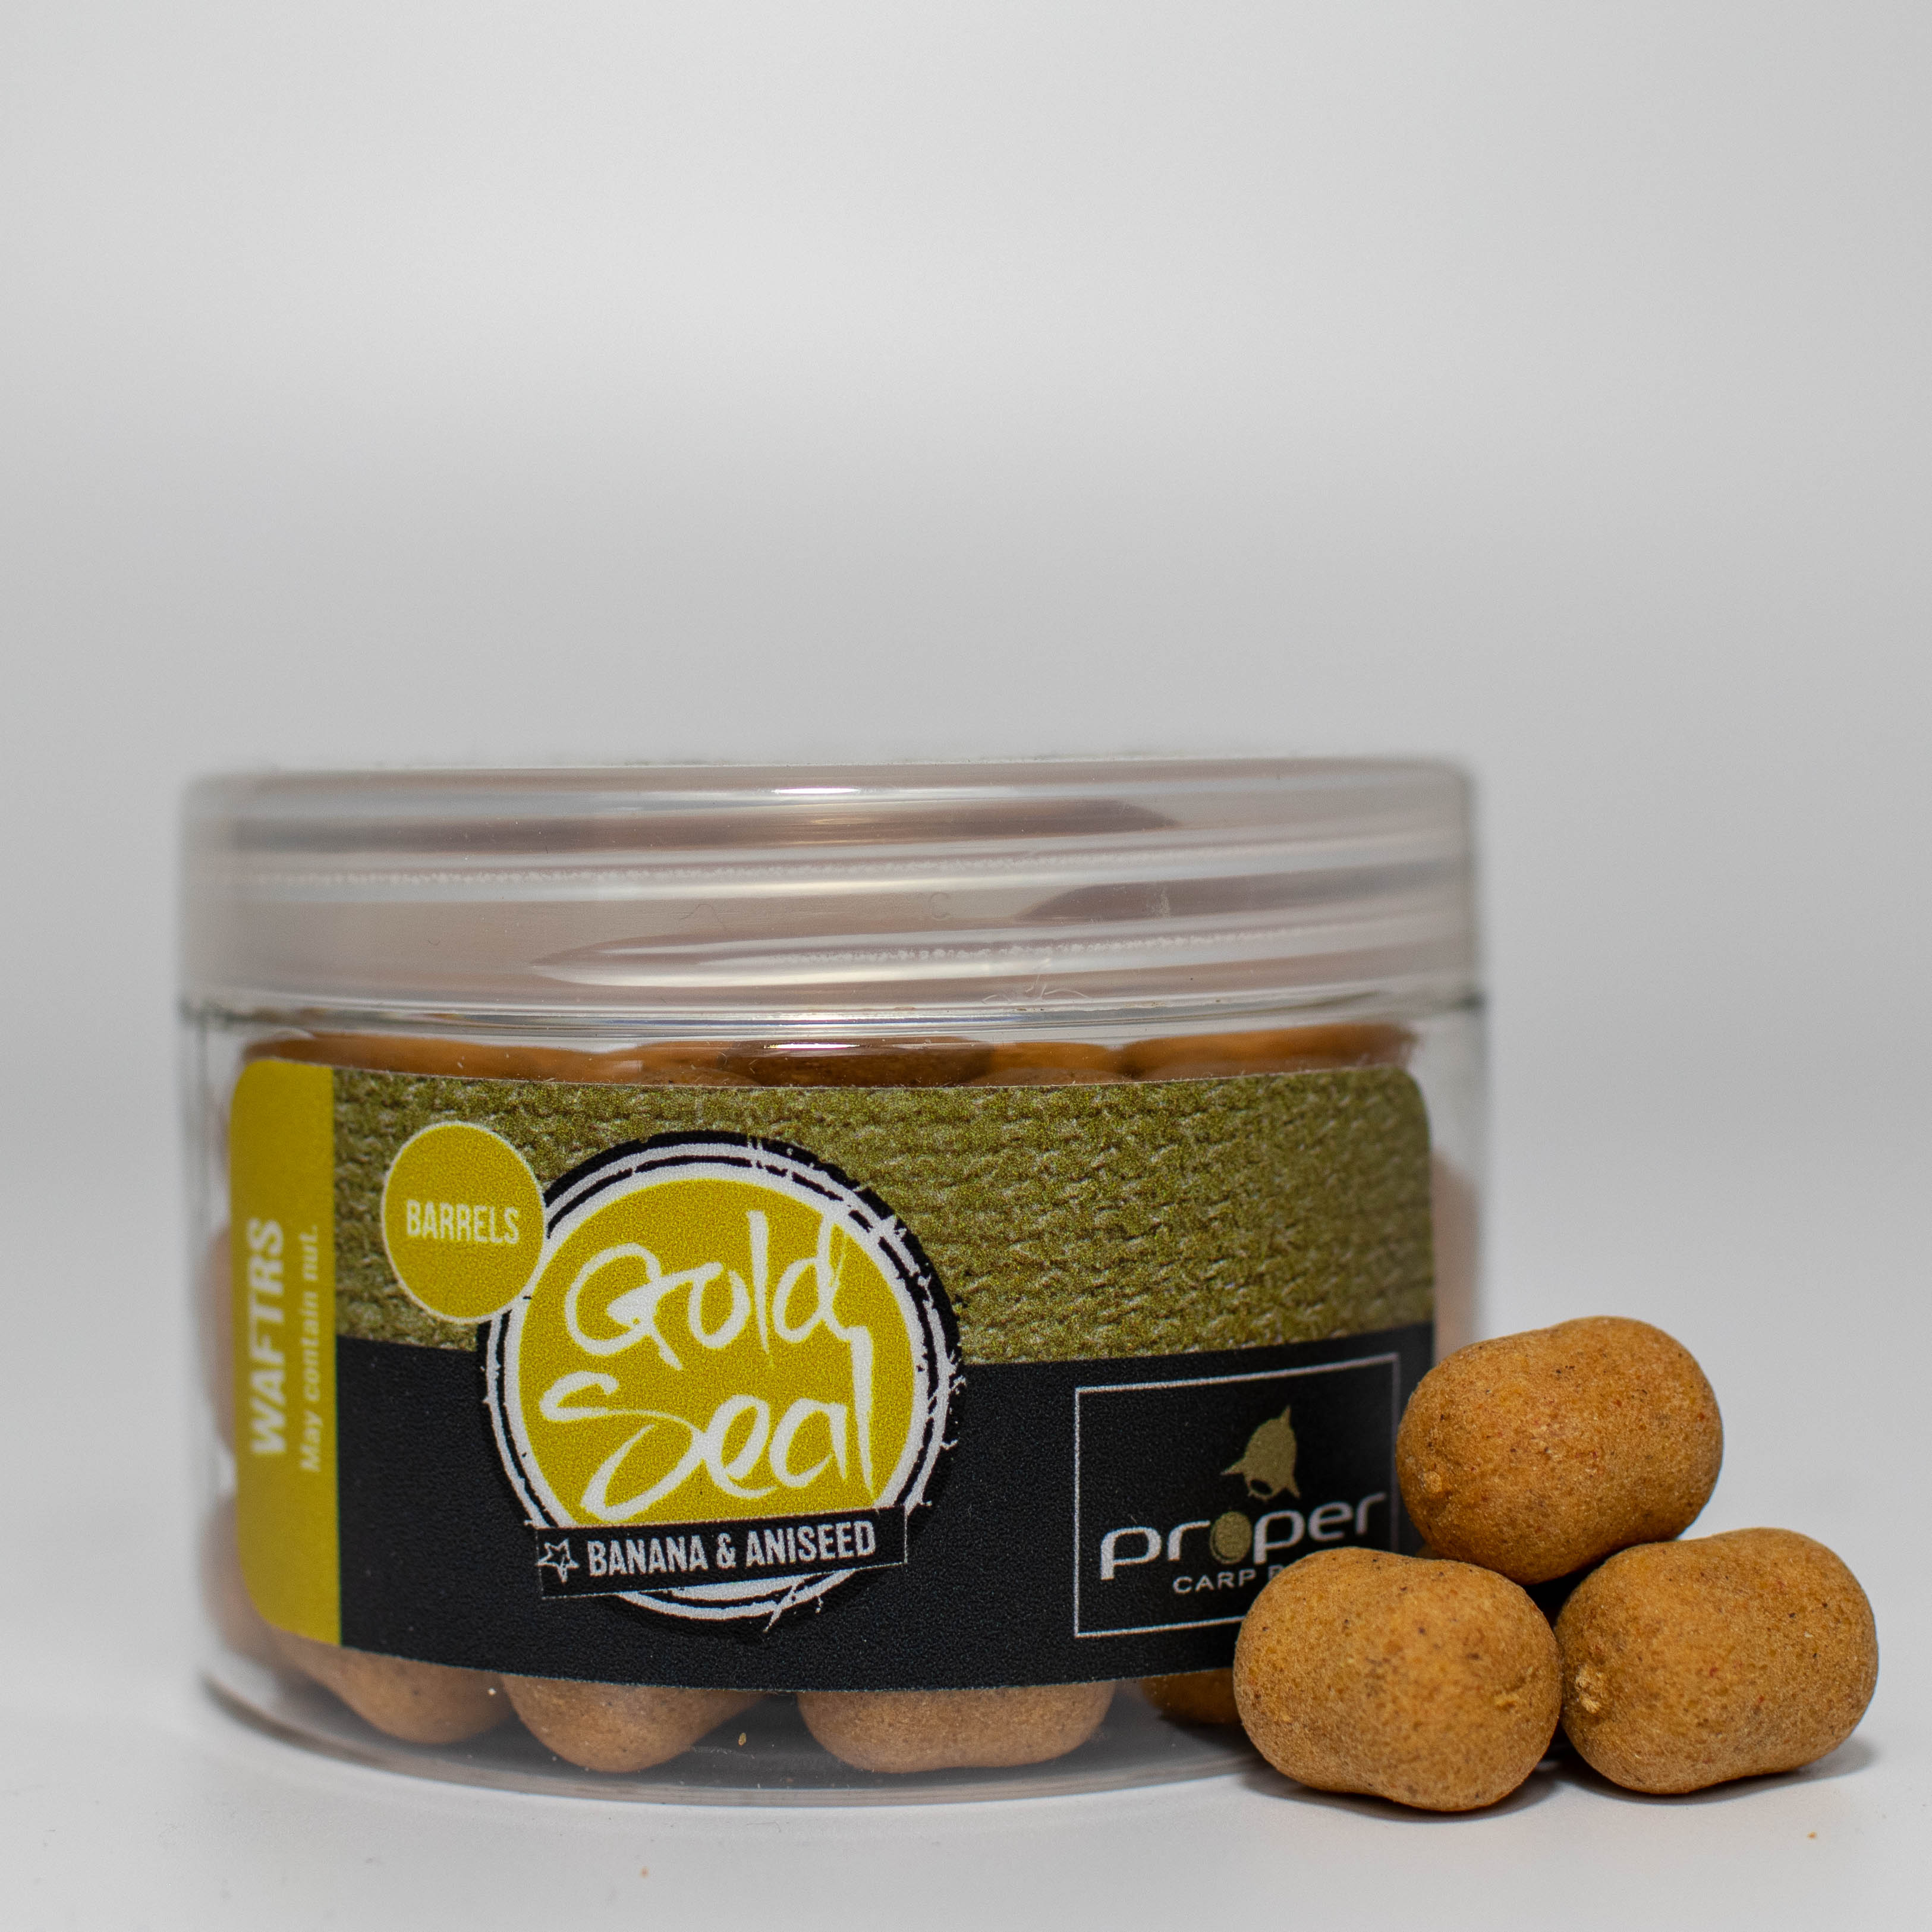 Proper Carp Baits Gold Seal Pop Ups Glugg *PAY 1 POST* Wafters Hard Hookers